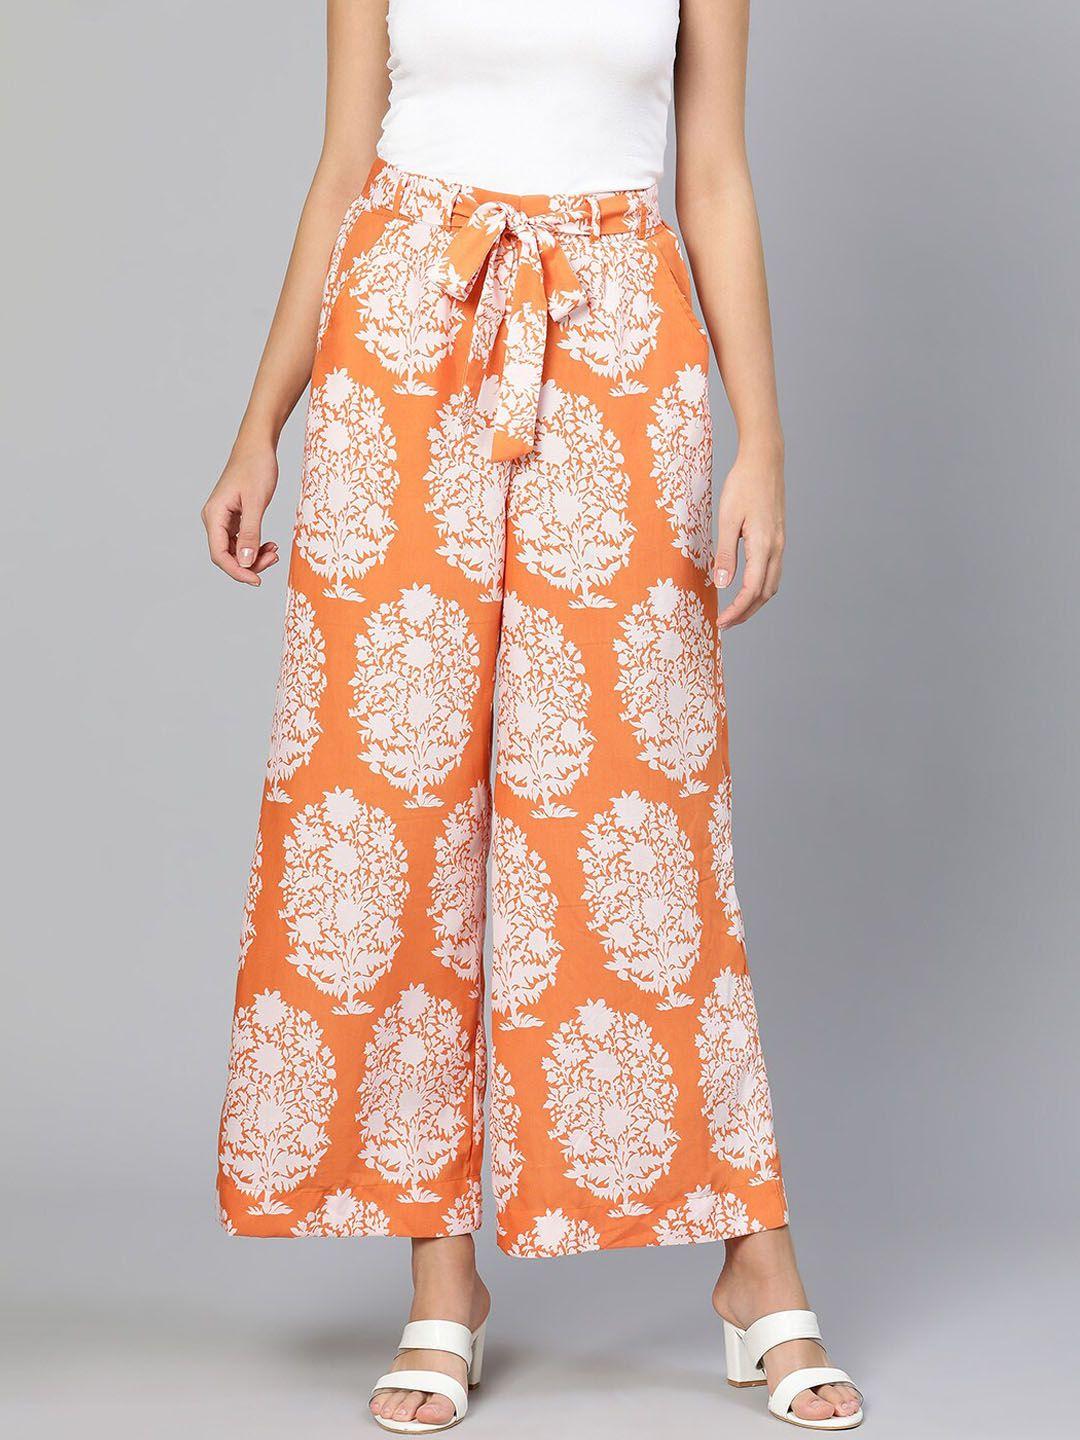 oxolloxo-women-orange-floral-printed-trousers